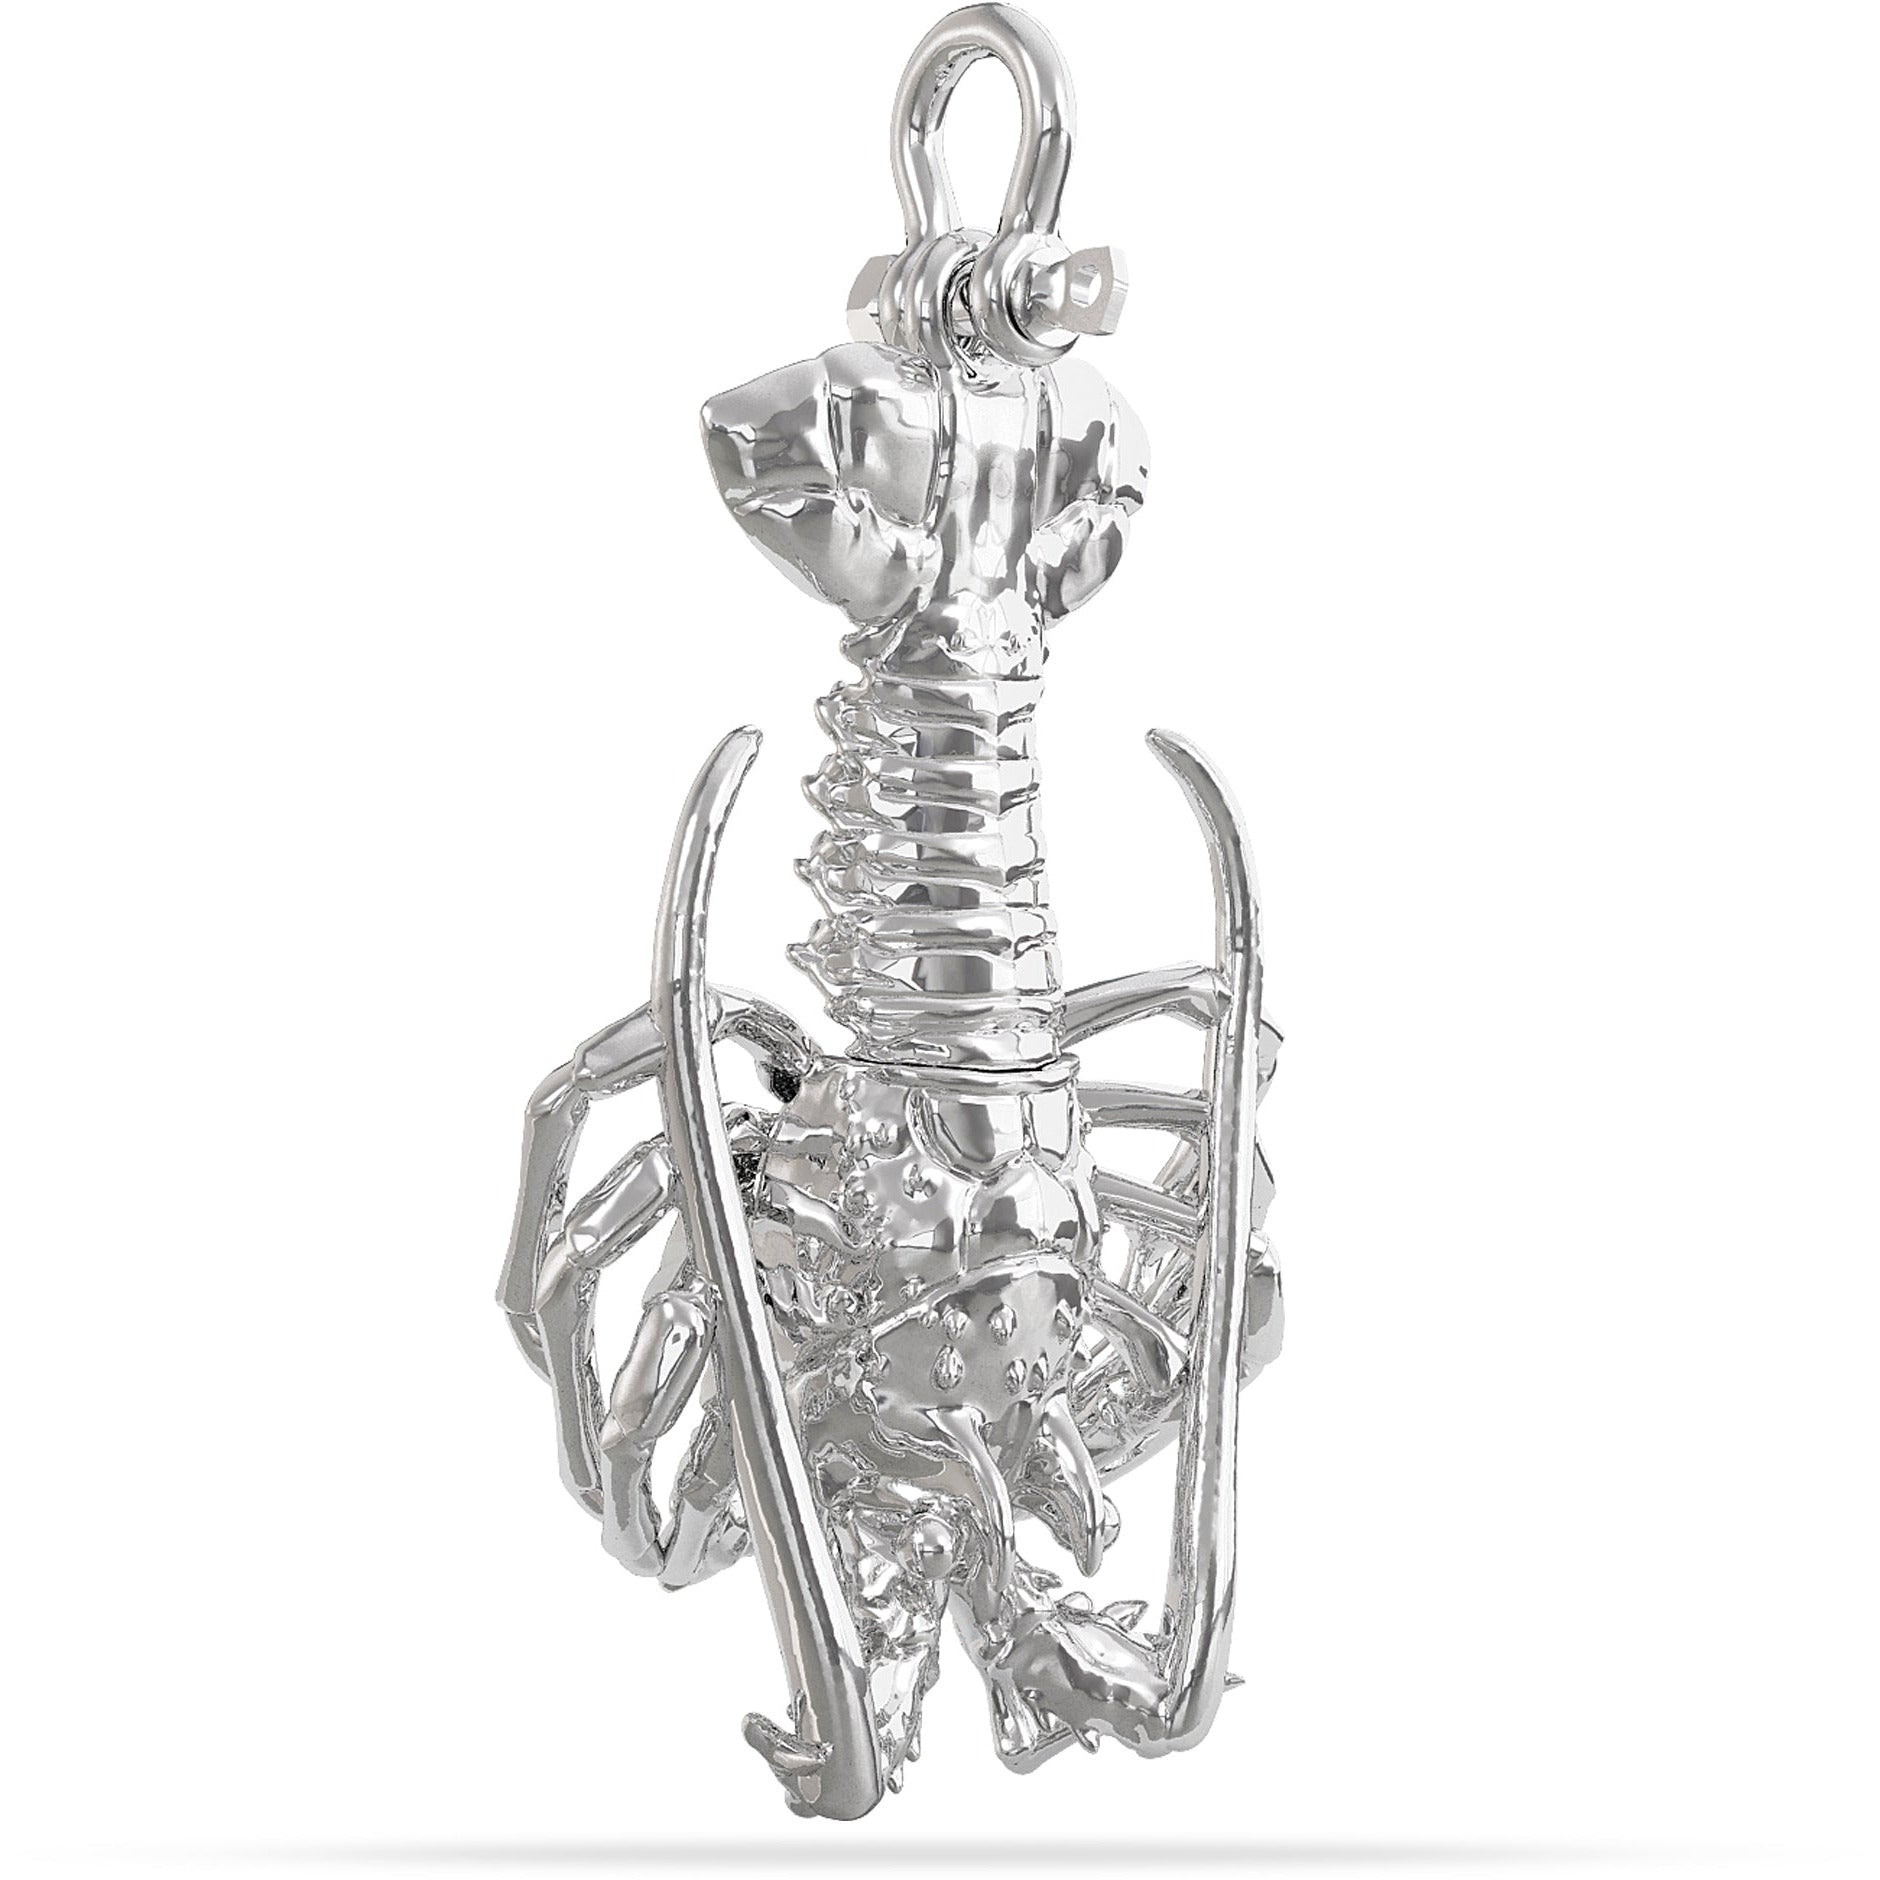 Sterling Silver Spiny Florida Lobster Pendant High Polished Mirror Finish Tail Hung on A Mariner Shackle Bail Custom Designed By Nautical Treasure Jewelry In The Florida Keys Islamorada for 2022 Mini Season